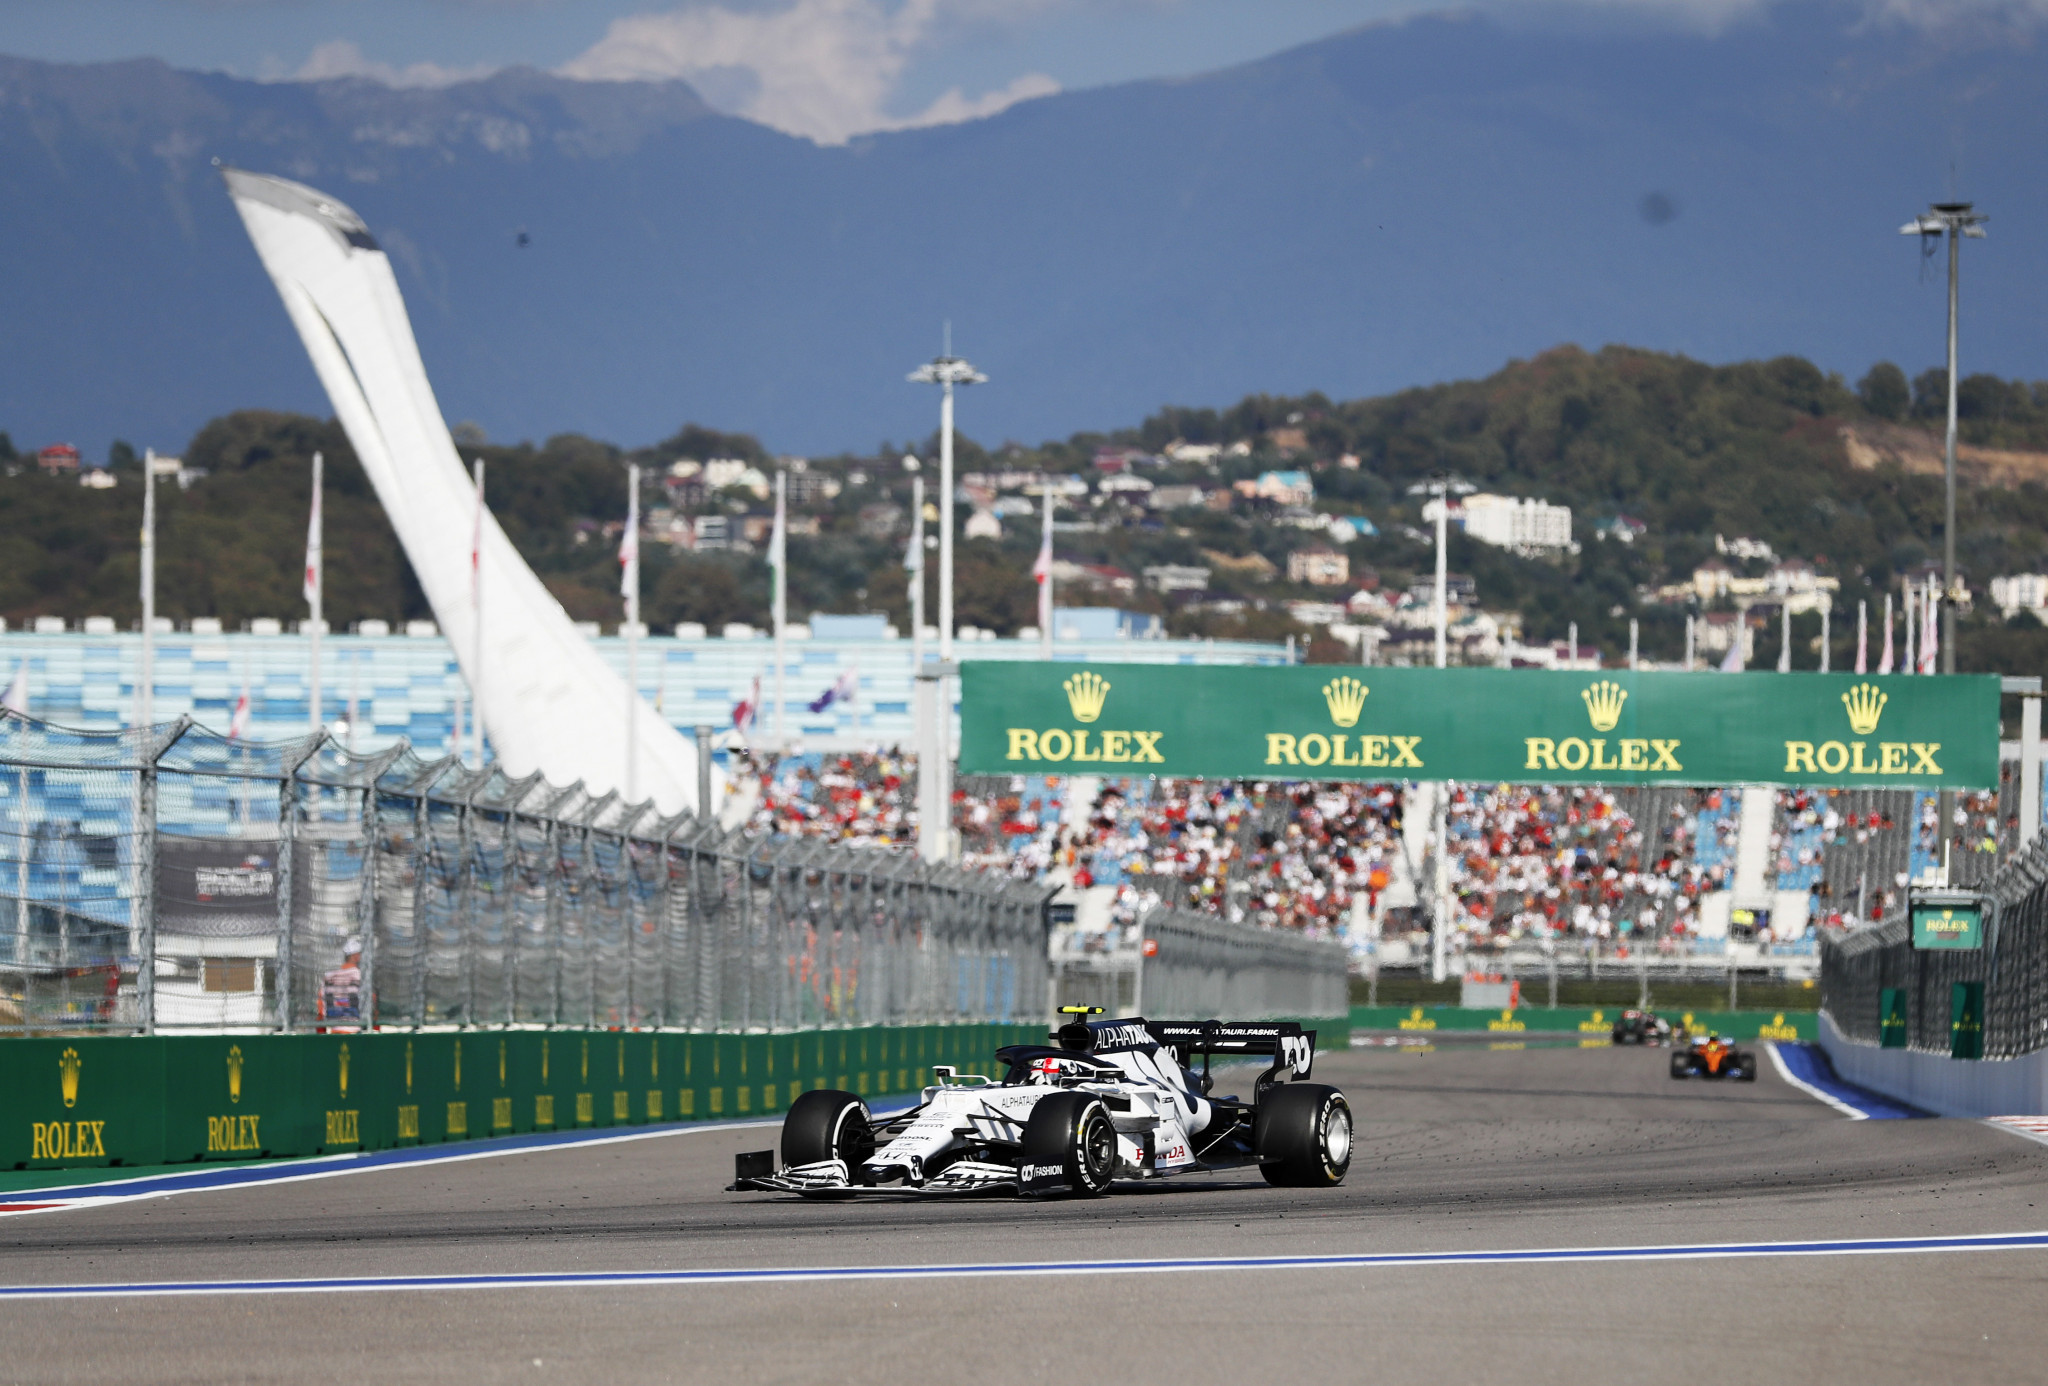 The Formula One Grand Prix at Sochi was cancelled in the wake of the Russian invasion of Ukraine  ©Getty Images